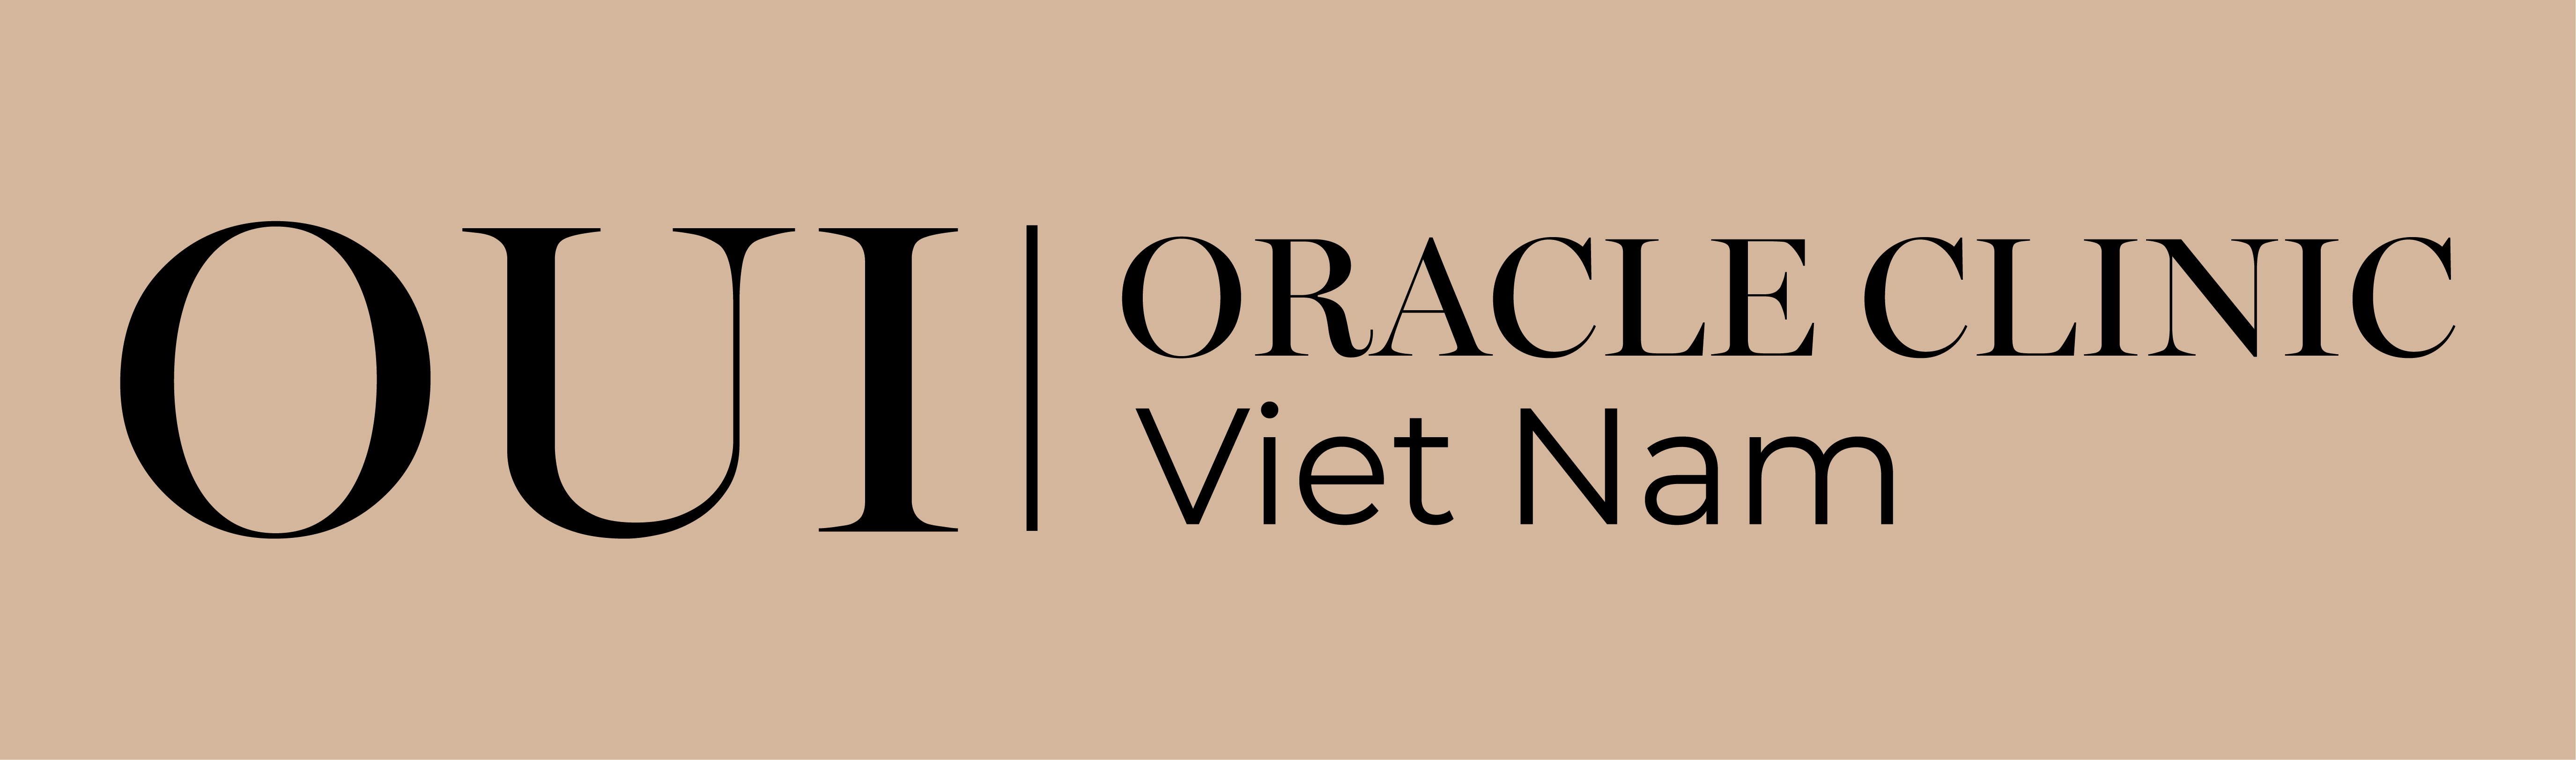 OUI - ORACLE CLINIC VIỆT NAM